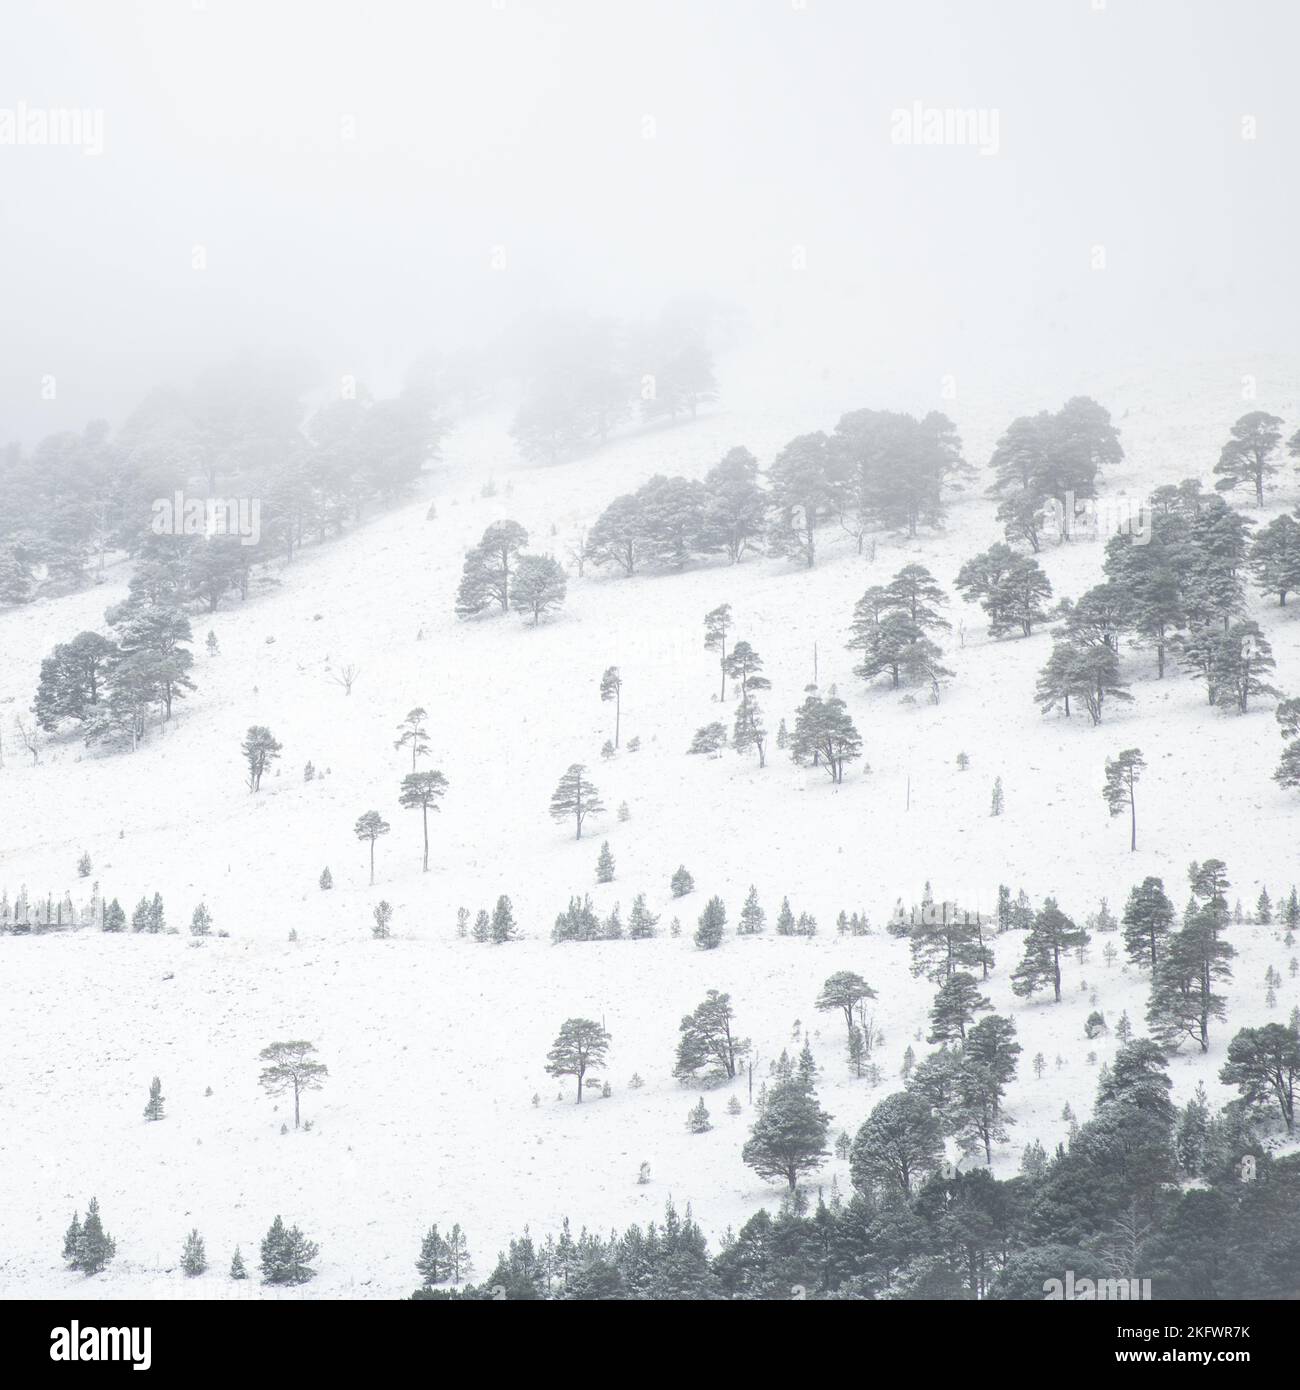 A snowy day at the mountain tree line, Cairngorms National Park, Scotland. Stock Photo